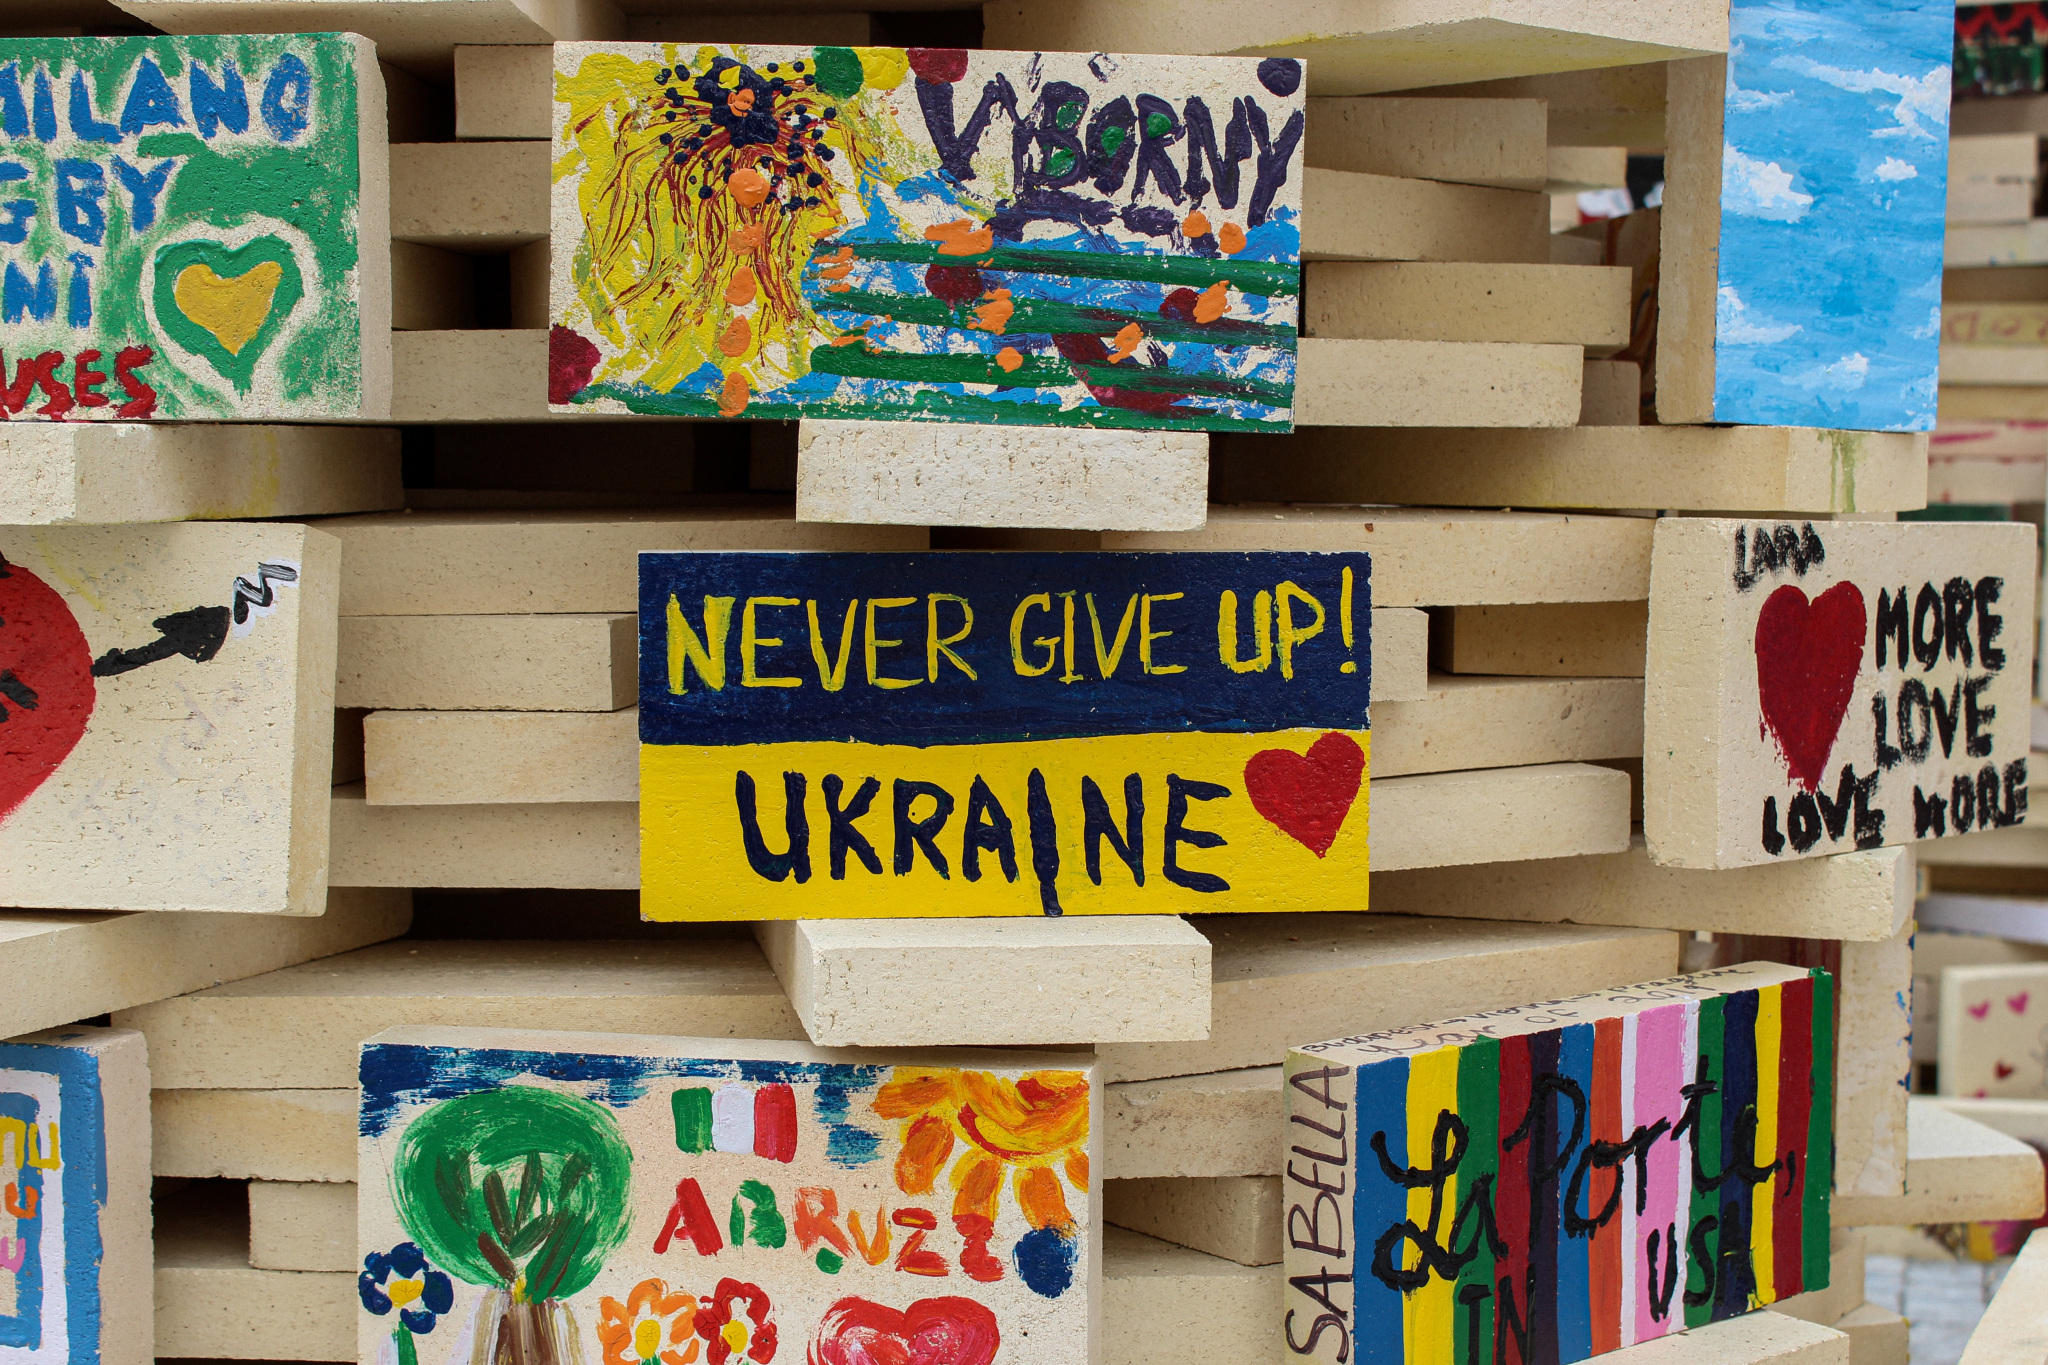 We invite you to donate to the people of Eastern Ukraine